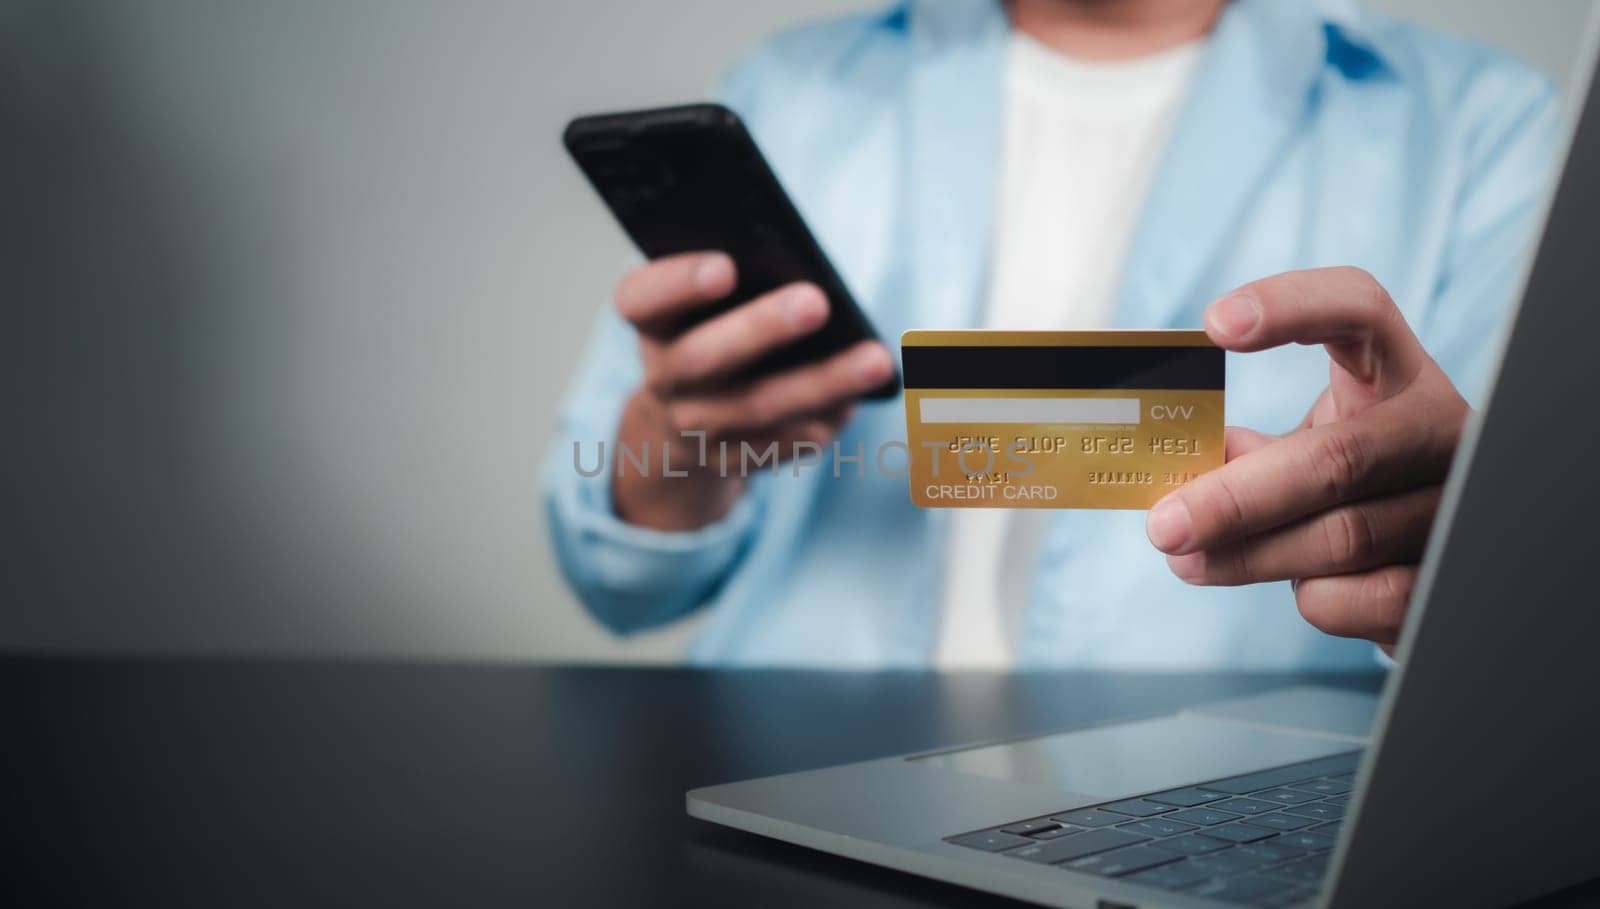 Online payment, Man using computer and credit card for online shopping, Digital online payment concept, Technology online banking applications via internet network, financial transaction. by Unimages2527